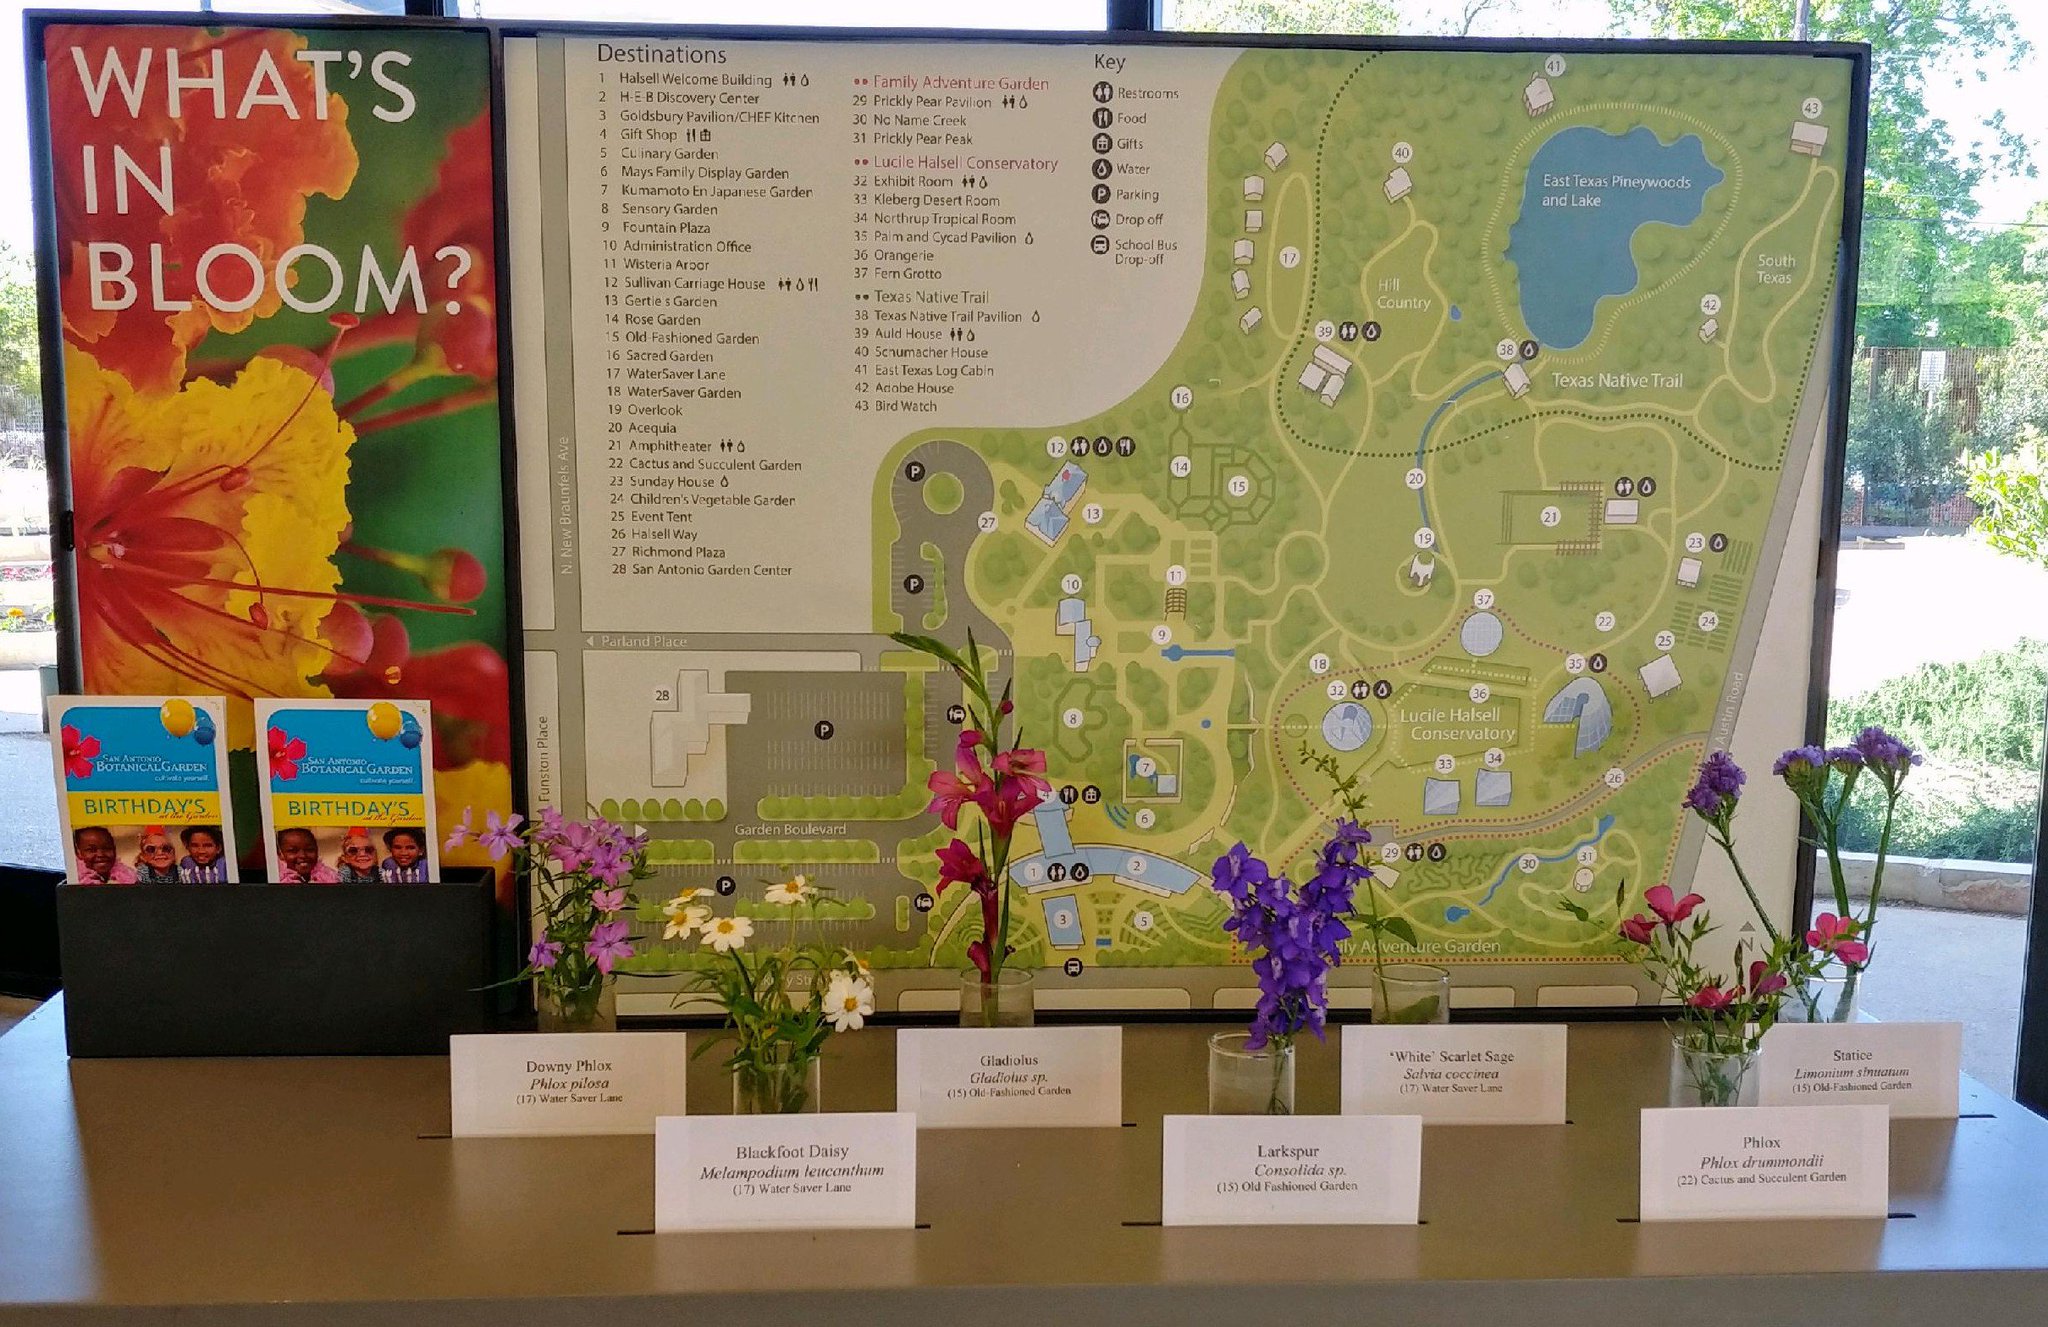 San Antonio Botanical Garden Want To Know What Is In Bloom Check Out Our Bloom Cart In Exploration Station Learn About Flowers In Blooms Their Scientific Names And Where To